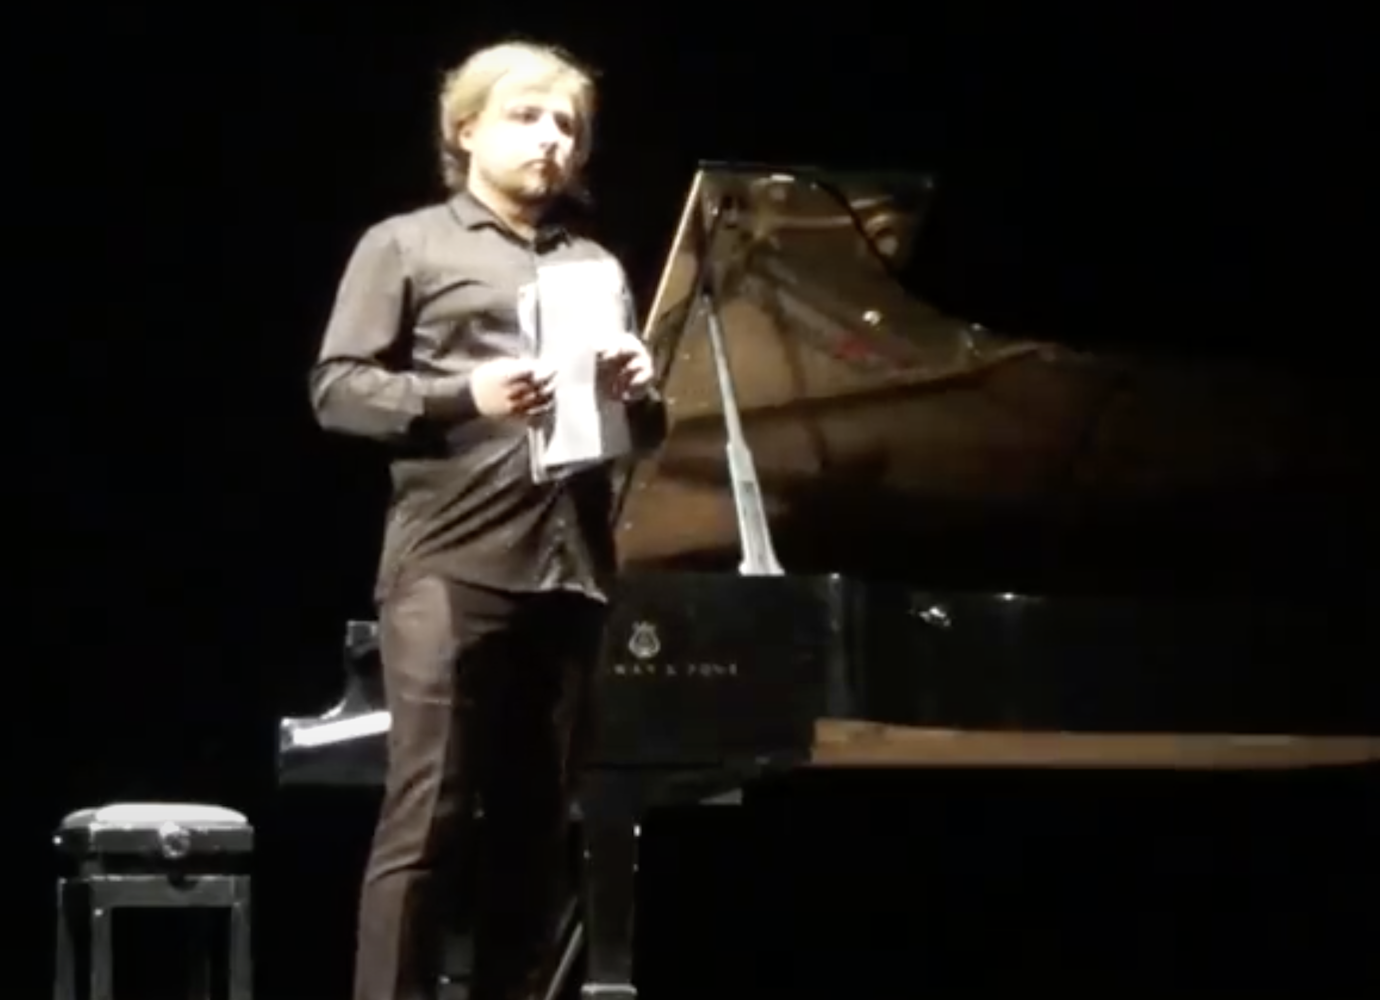 Novosibirsk pianist speaks out against repression